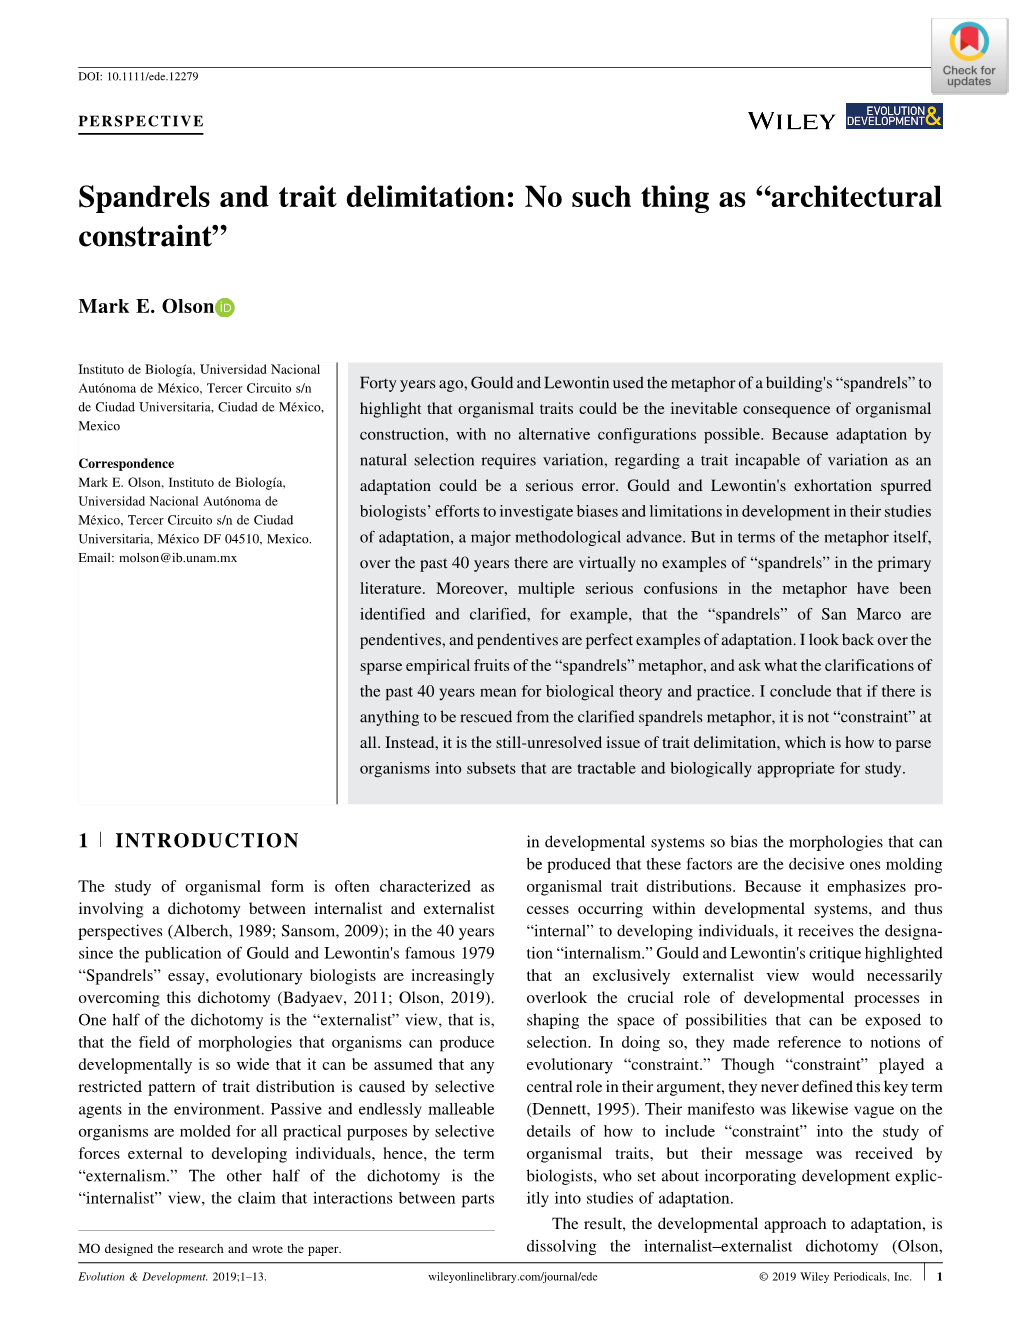 Spandrels and Trait Delimitation: No Such Thing As 'Architectural Constraint'